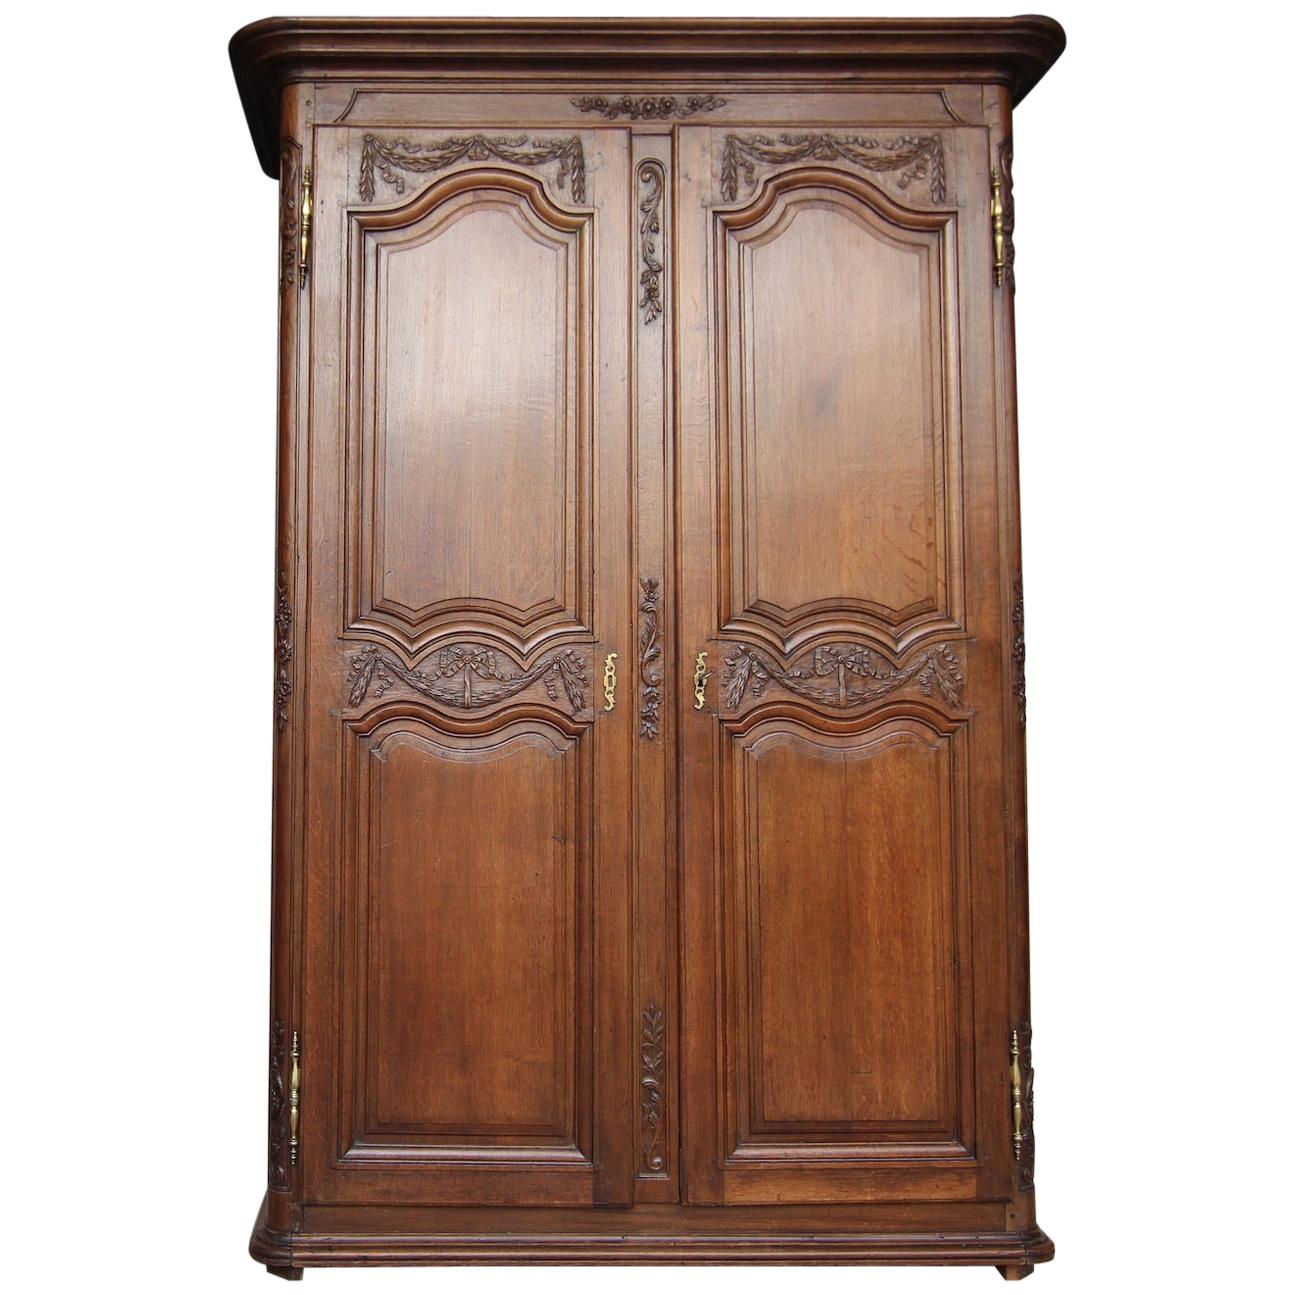 Late 18th Century French Provincial Louis XVI Cabinet or Armoire made of Oak